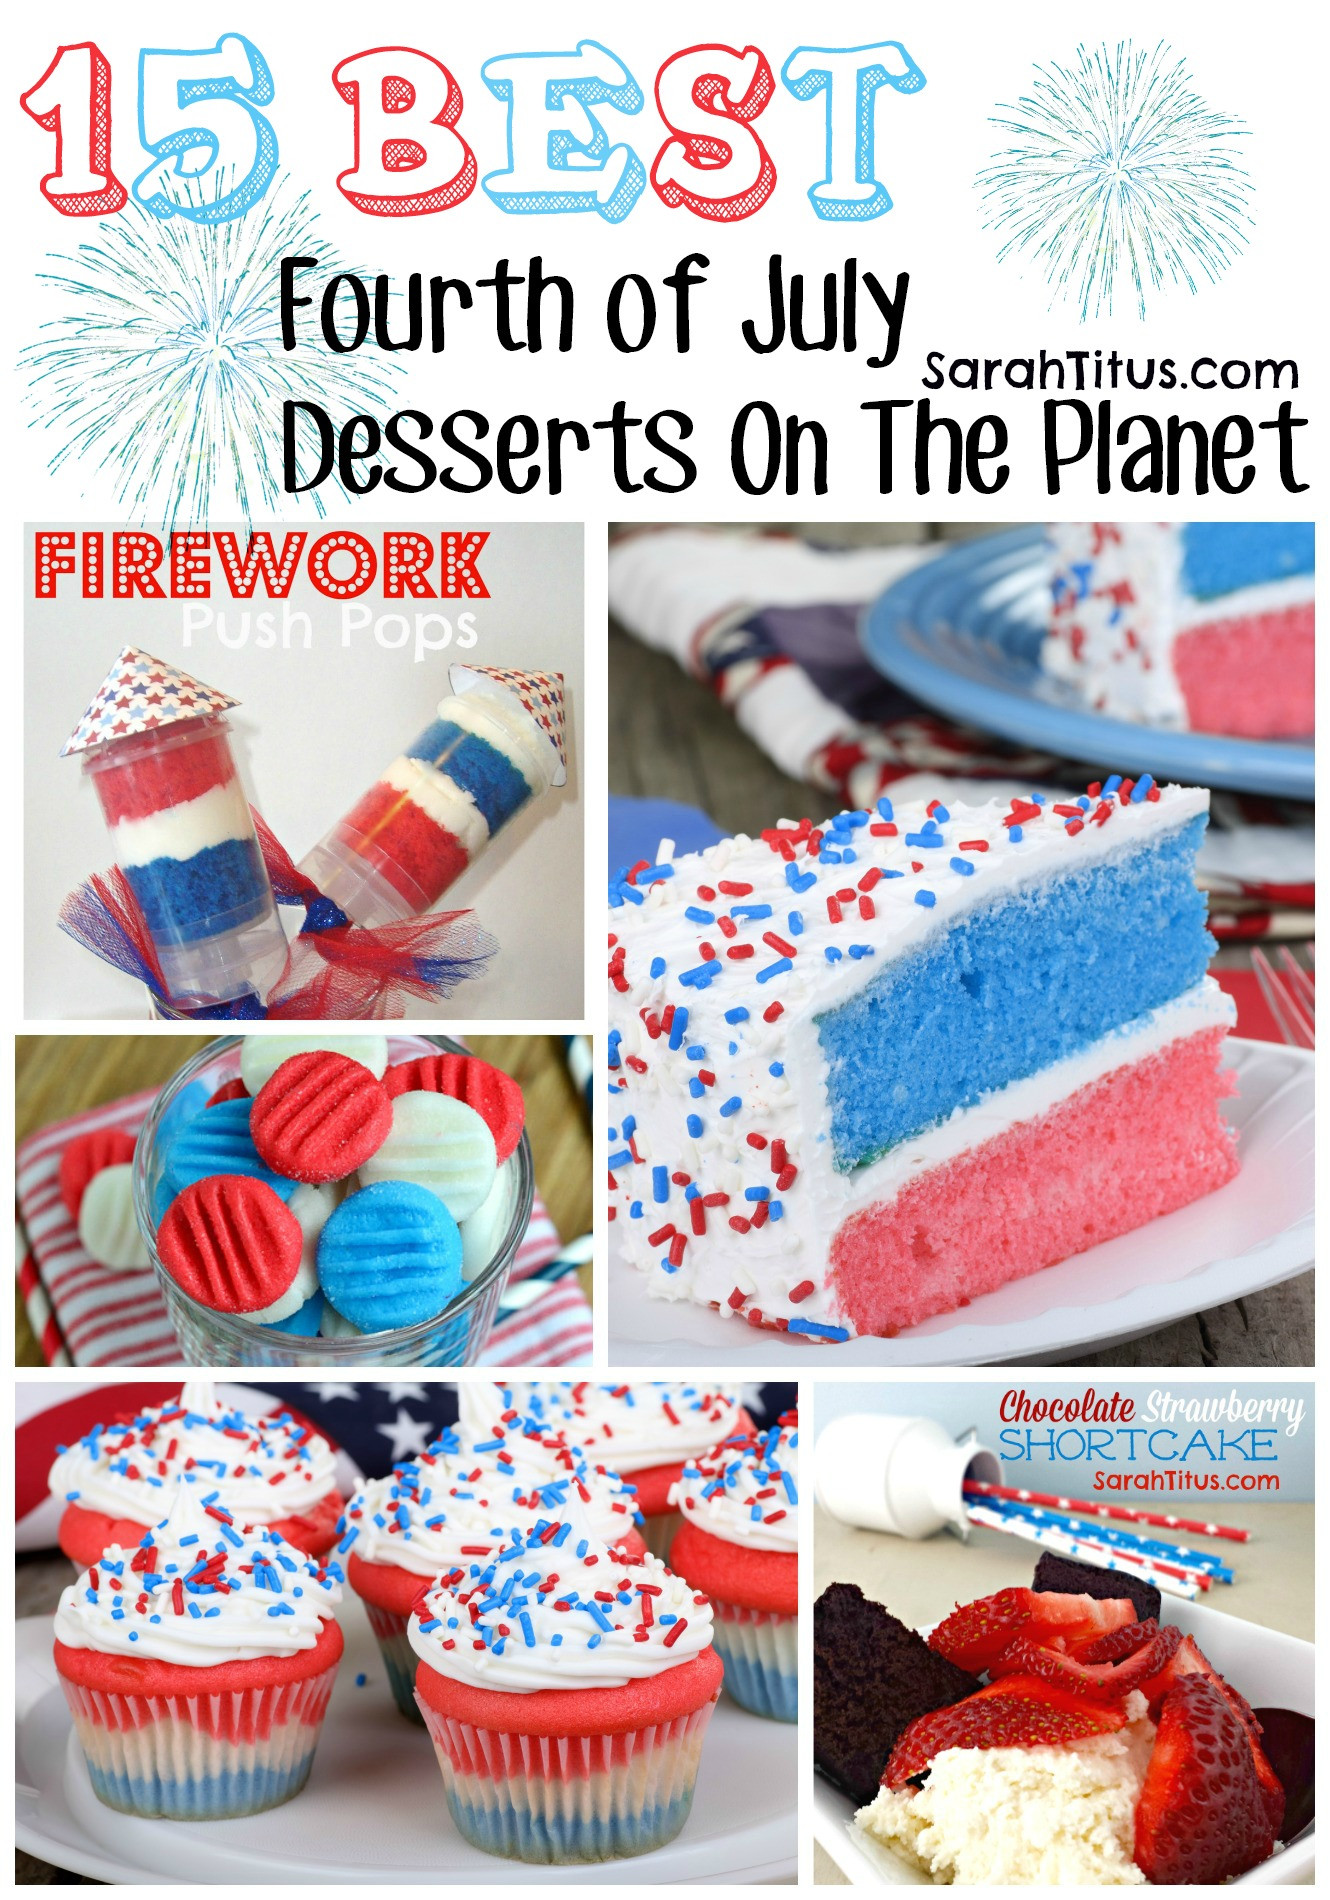 4Th Of July Recipes For Kids
 15 Best Fourth of July Desserts The Planet Sarah Titus